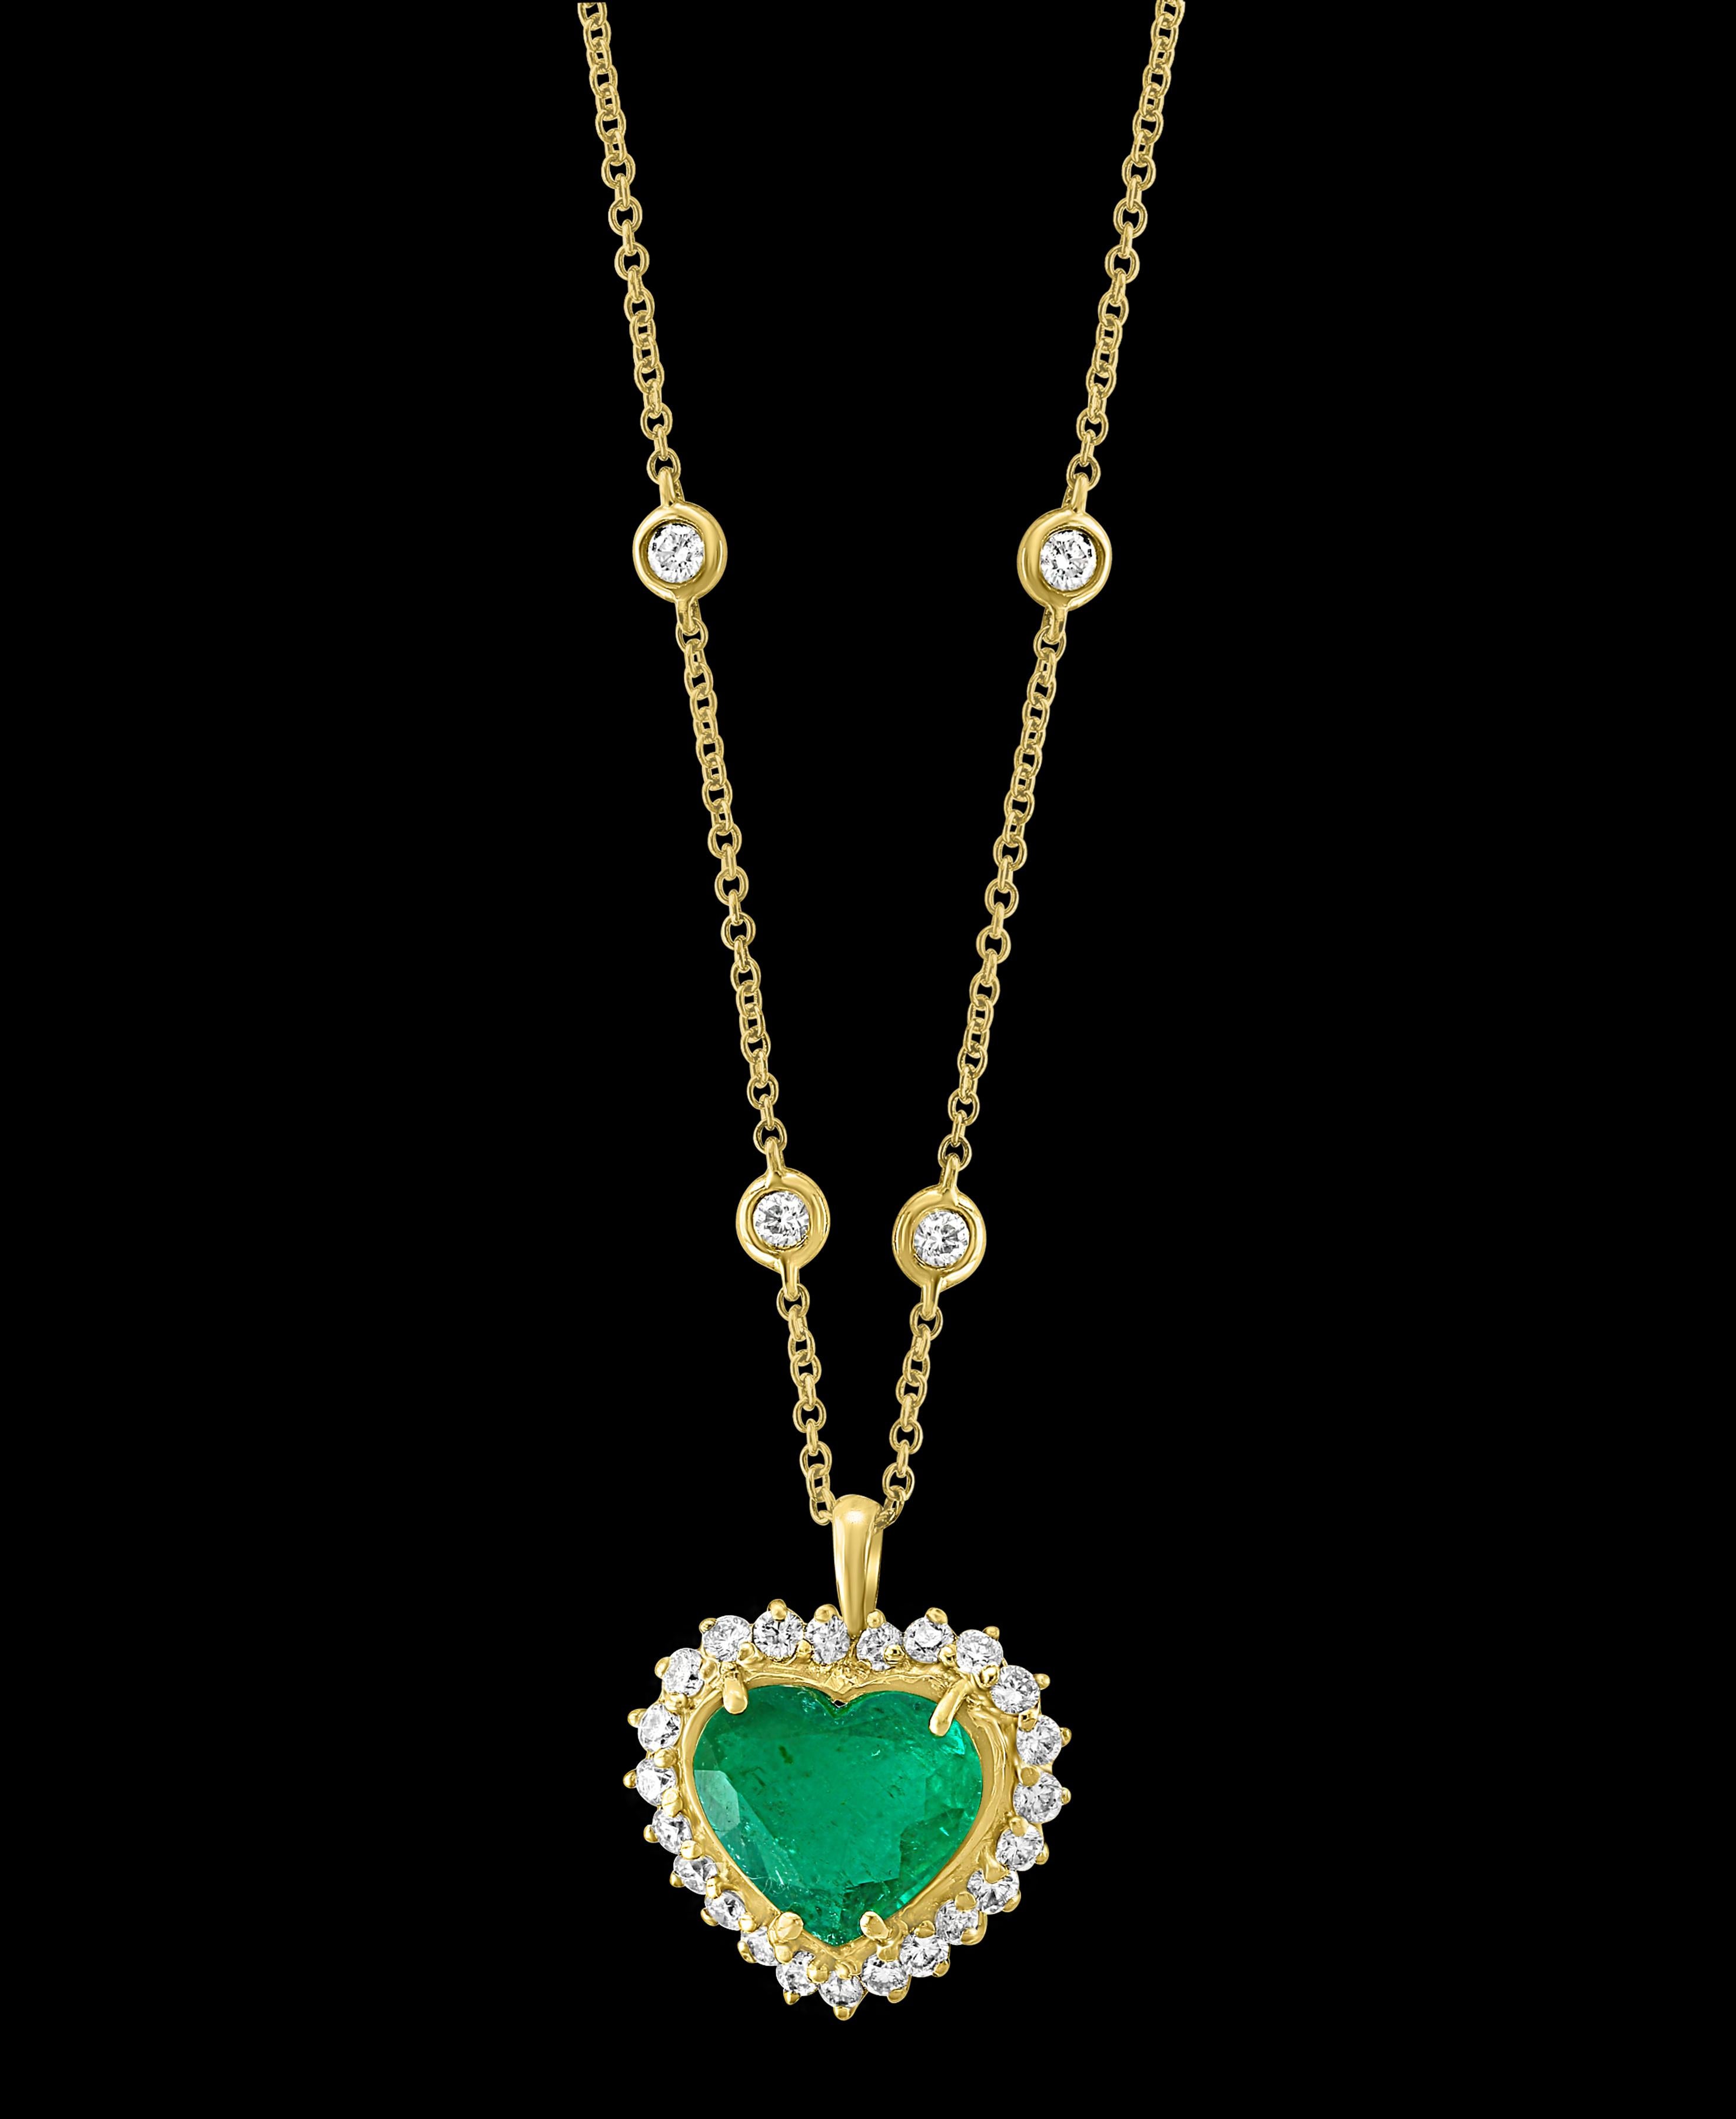 Oval Cut 6+ Carat Heart Shape  Colombian Emerald and Diamond Pendant Necklace DBY Chain